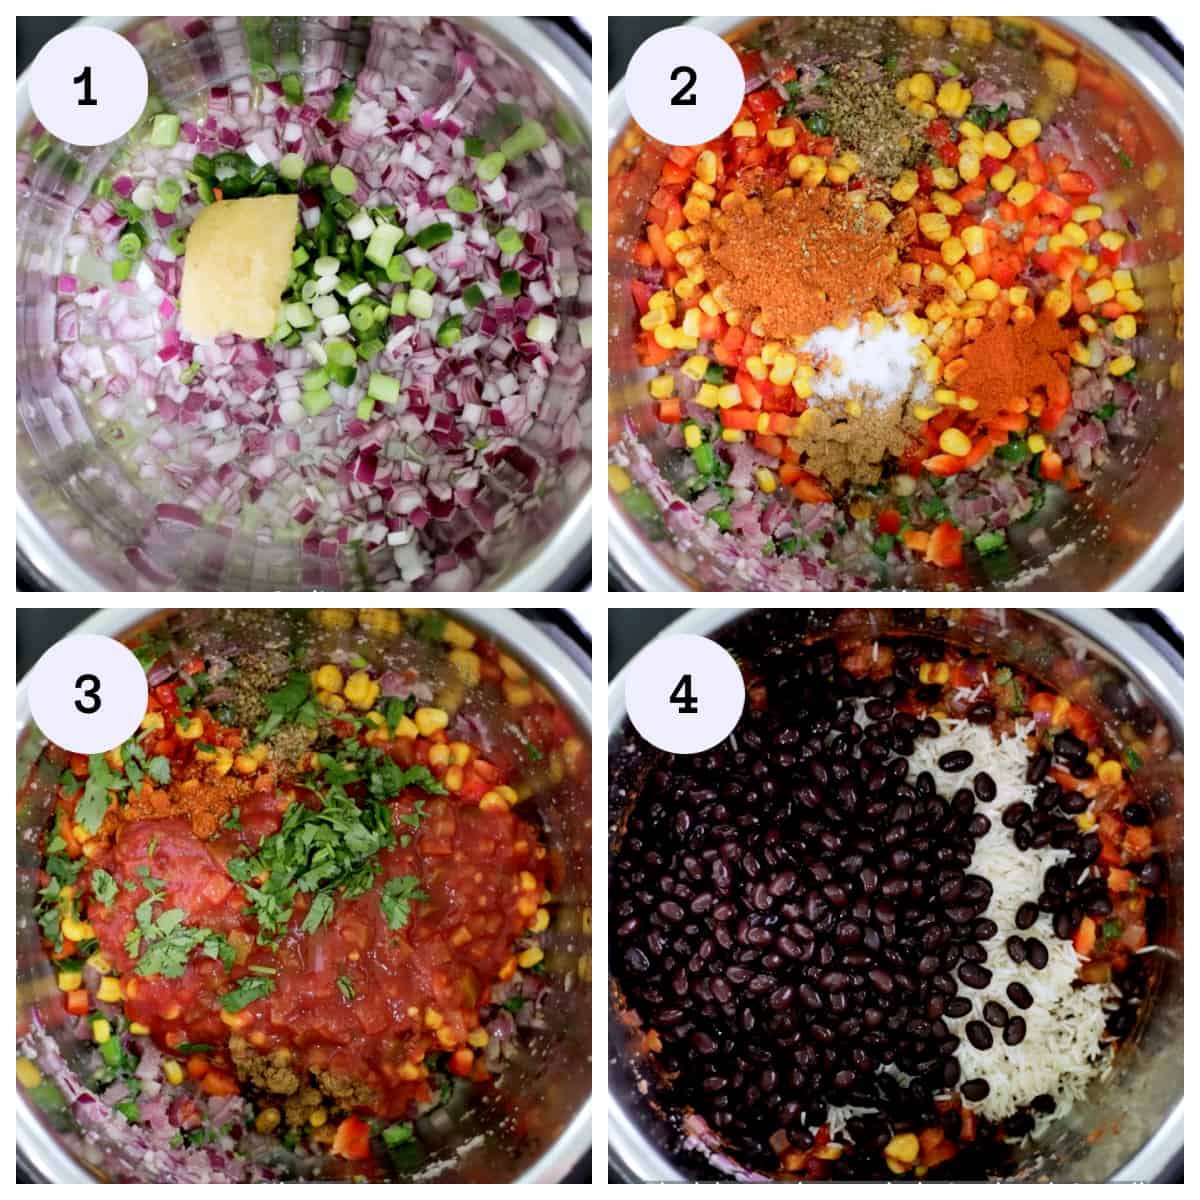 Steps showing adding onions, veggies, spices, rice and beans to make Mexican rice and beans in the instant pot